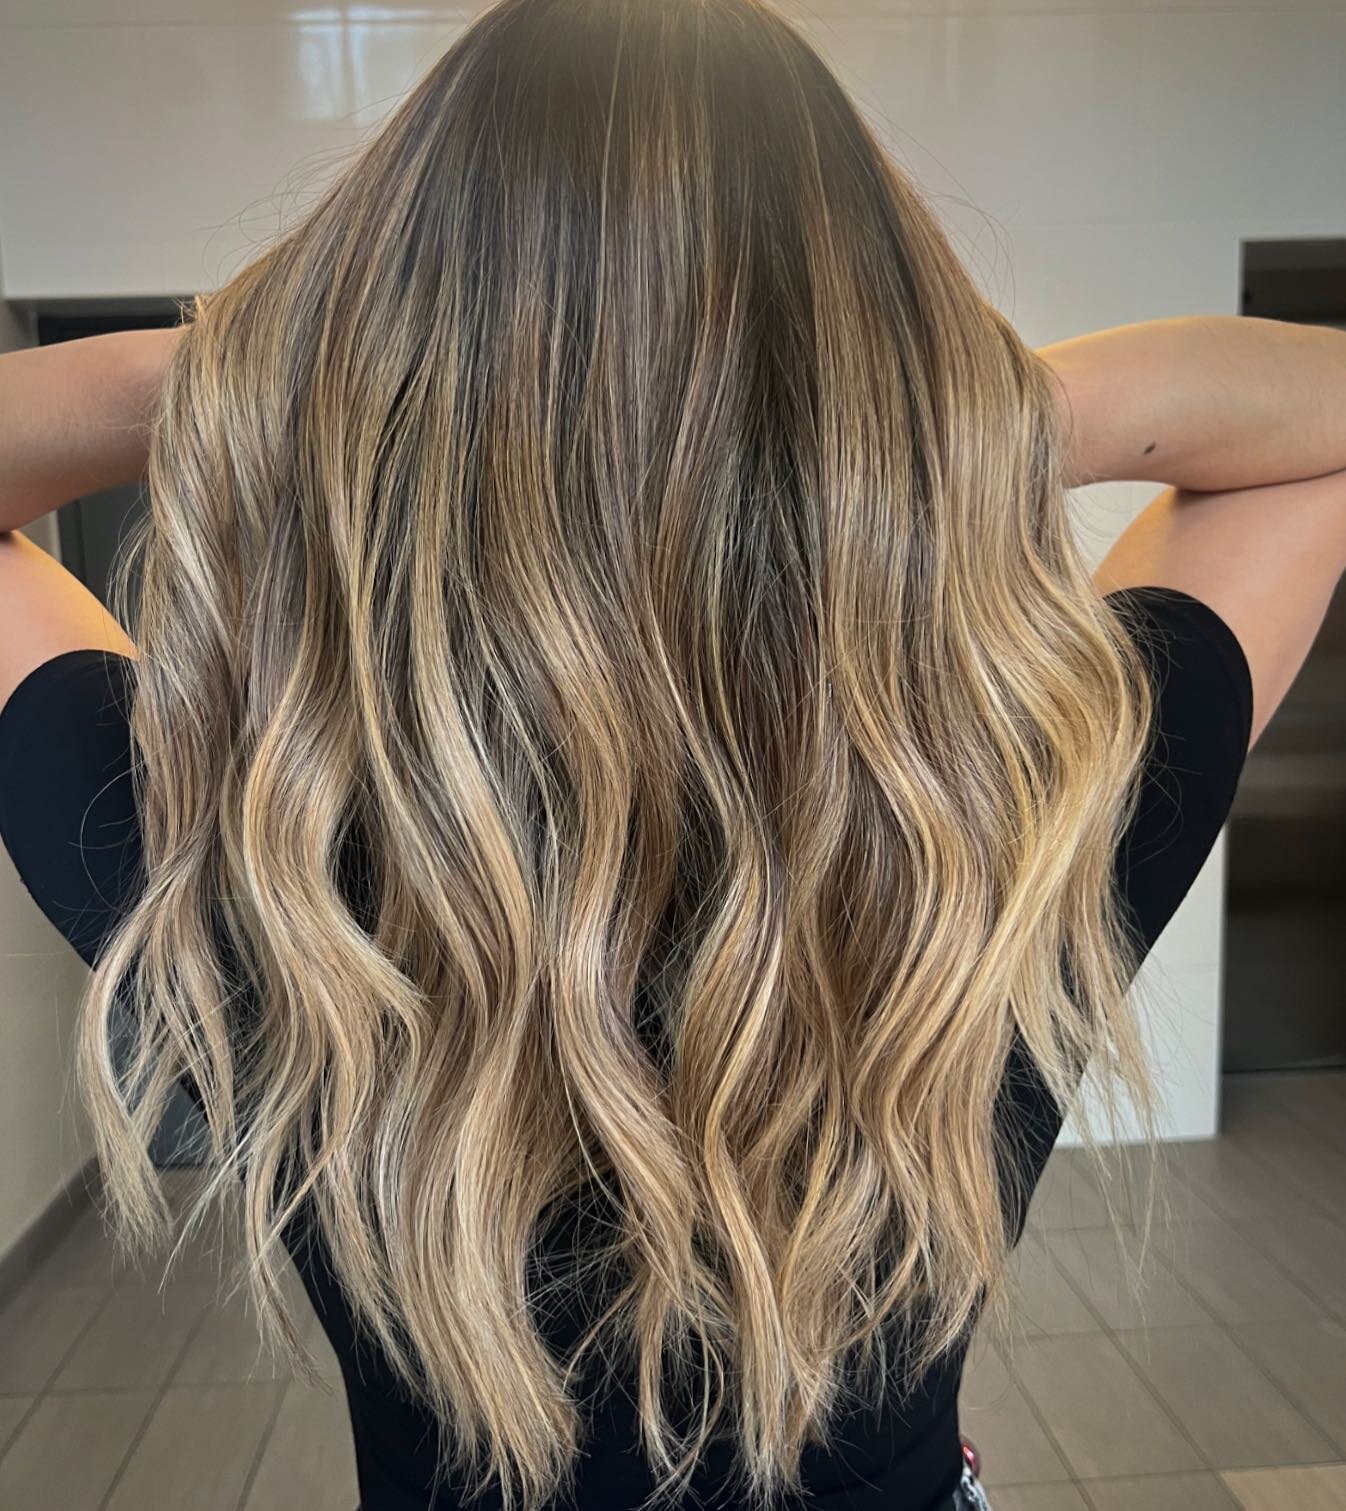 Summer Hair Alert 🔔 
.
Start your blonding journey now 🙃
.
#mobawards_brunette2023 
#mobawards_highcontrast2023 
.
Lifted using @lorealpro studio 9
.
Treated with @k18hair to maintain health 
.
Styled using @t3micro 1.25 barrel 
.
Mane breakdown:
M